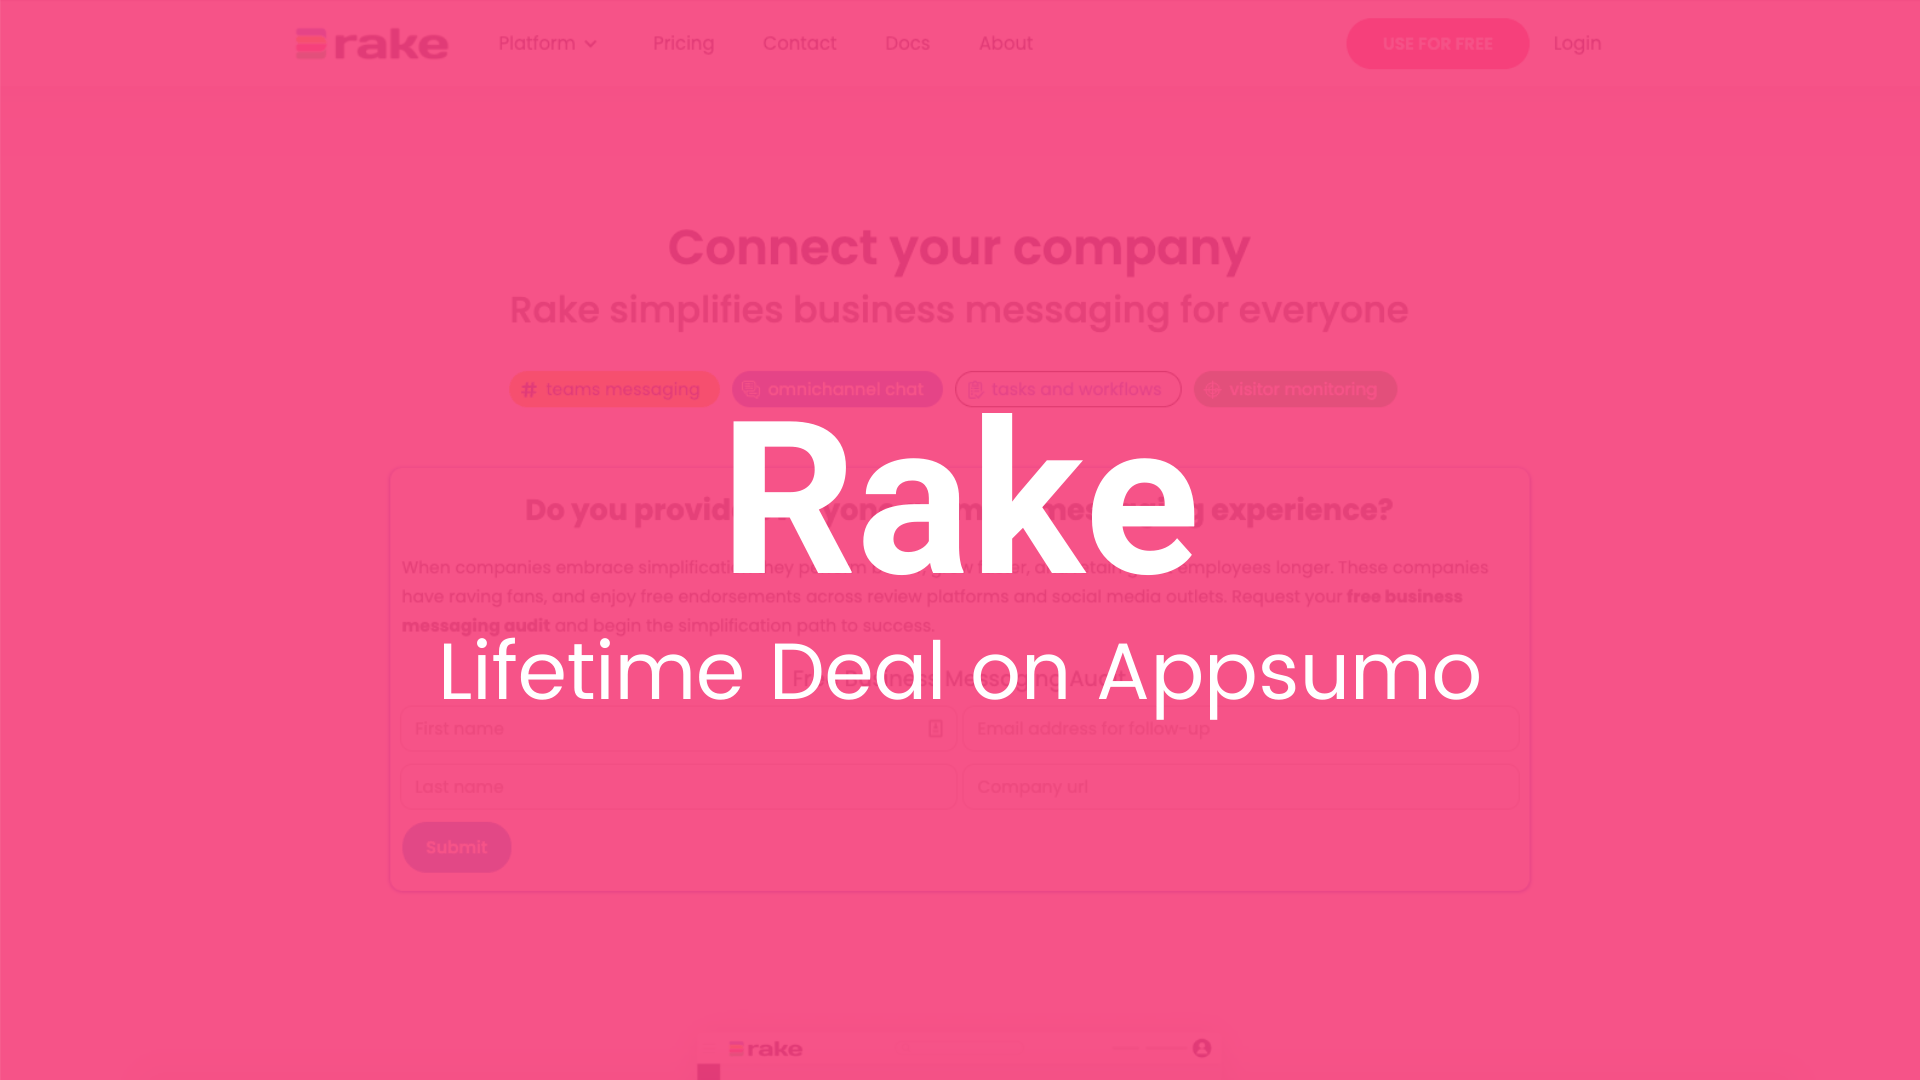 rake: Simplifying Messaging for Your Company